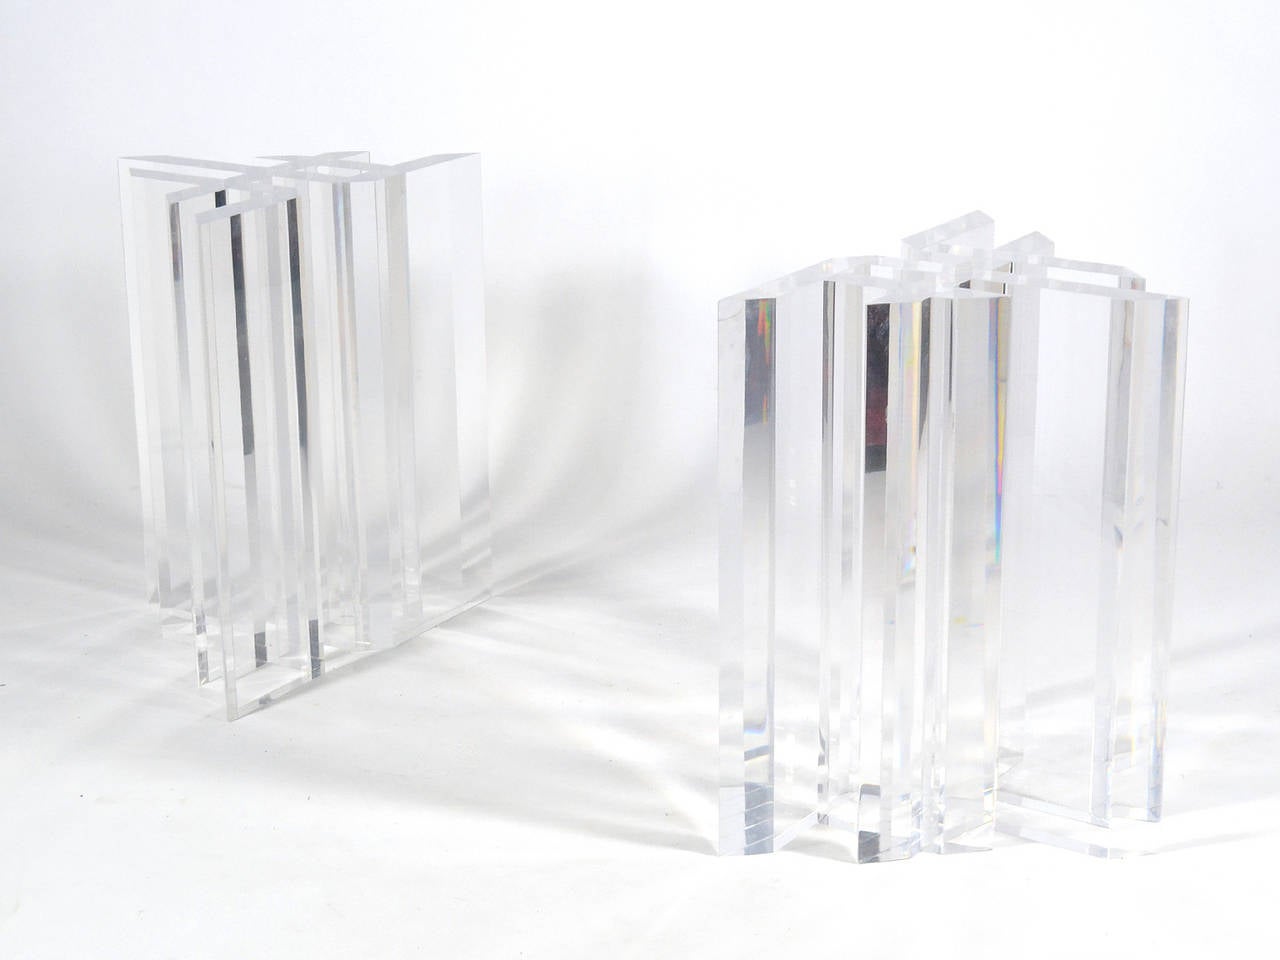 This pair of dynamic John Mascheroni table pedestals have a complex geometric design executed in thick Lucite. The two bases can be arranged in different configurations and are capable of supporting a very large glass top for a substantial dining